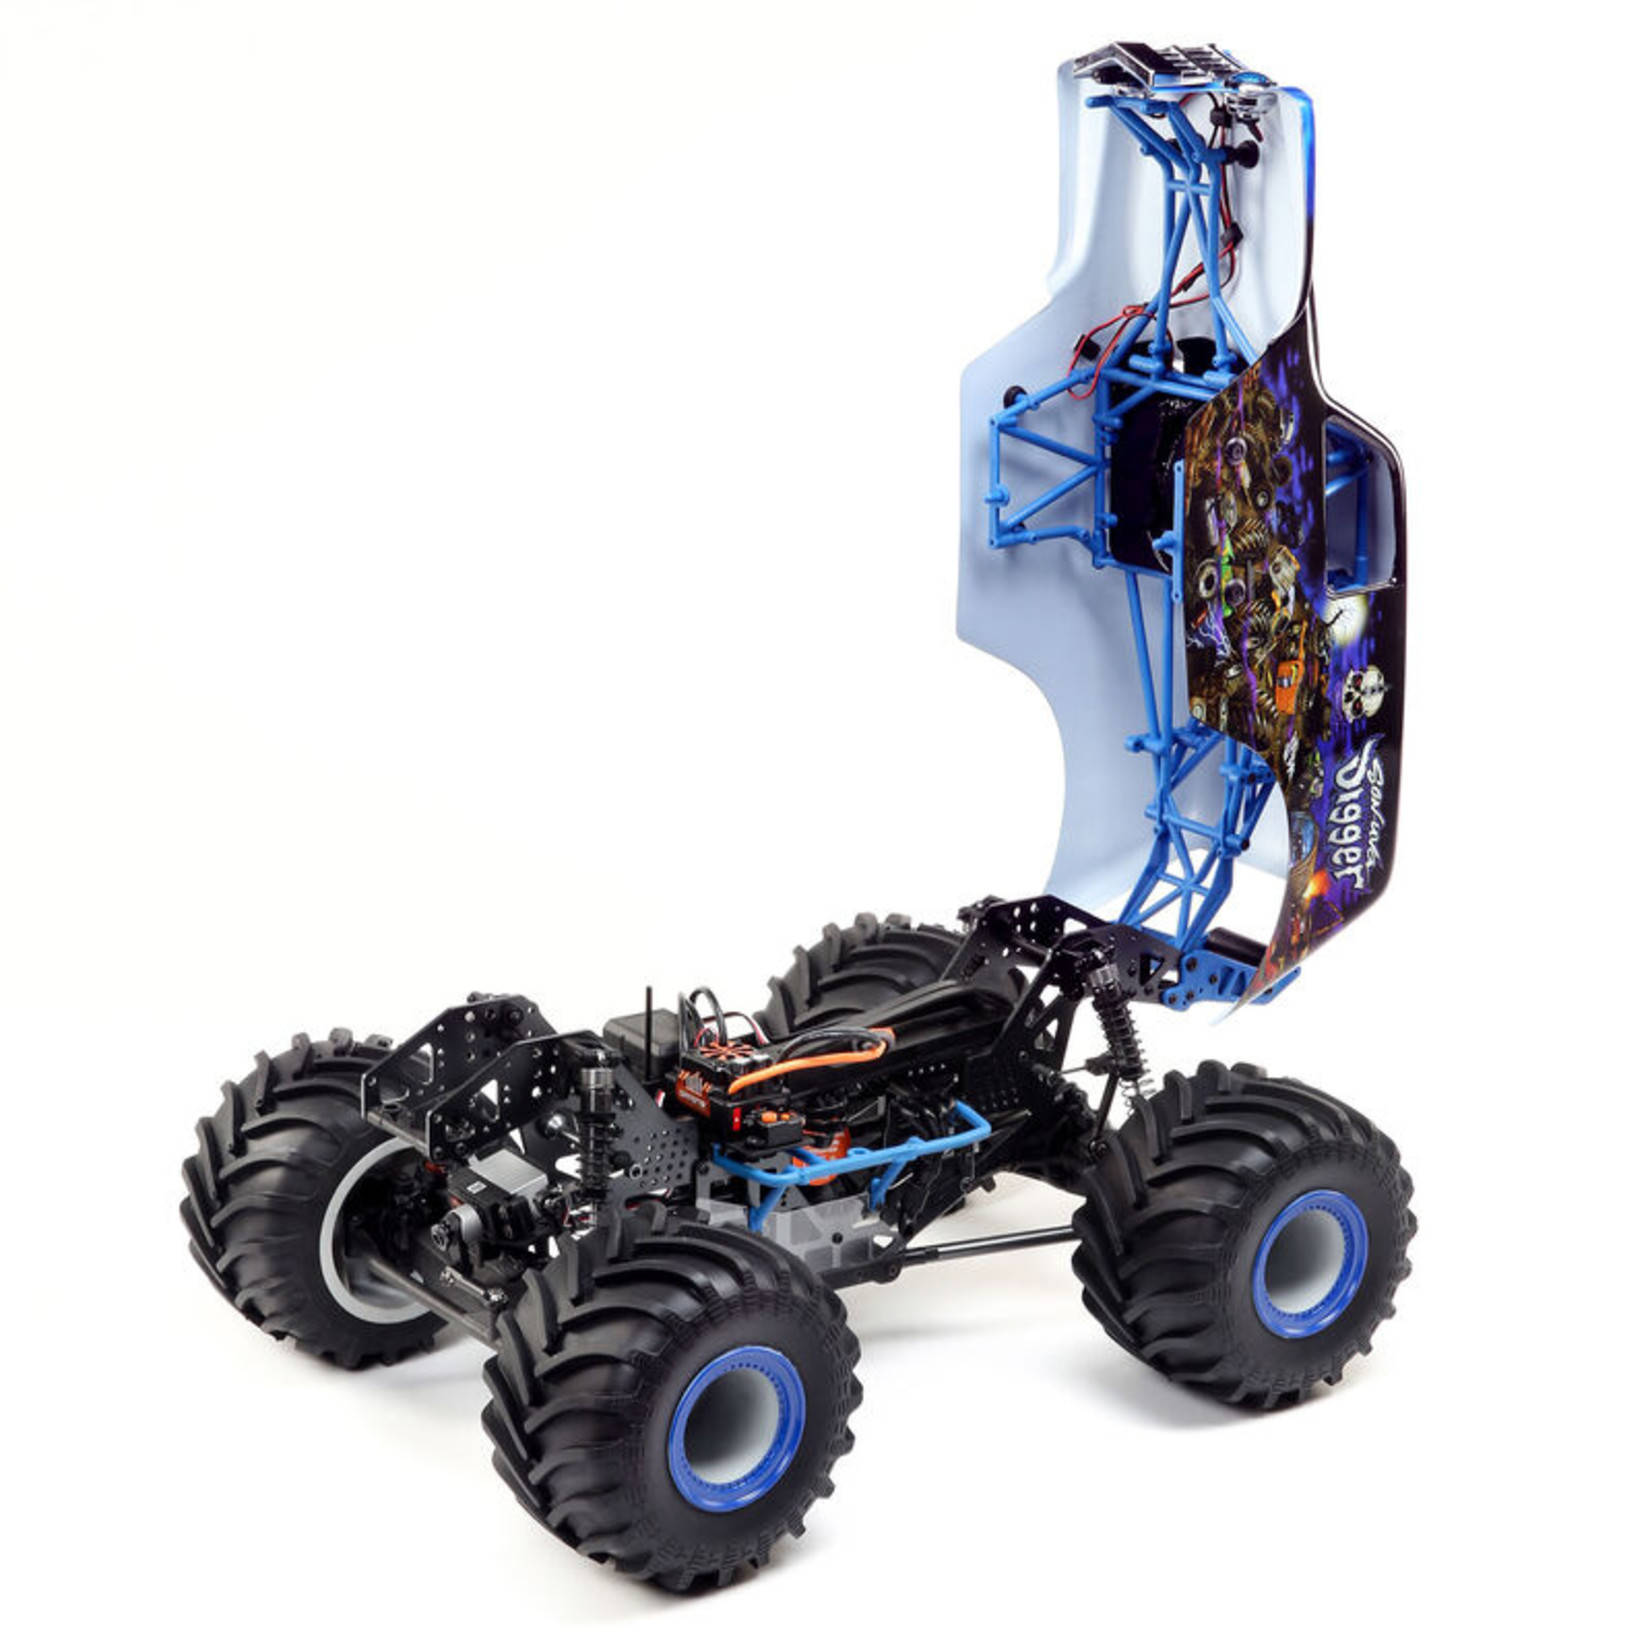 Losi LMT:4wd Solid Axle Monster Truck, SonUvaDigger:RTR